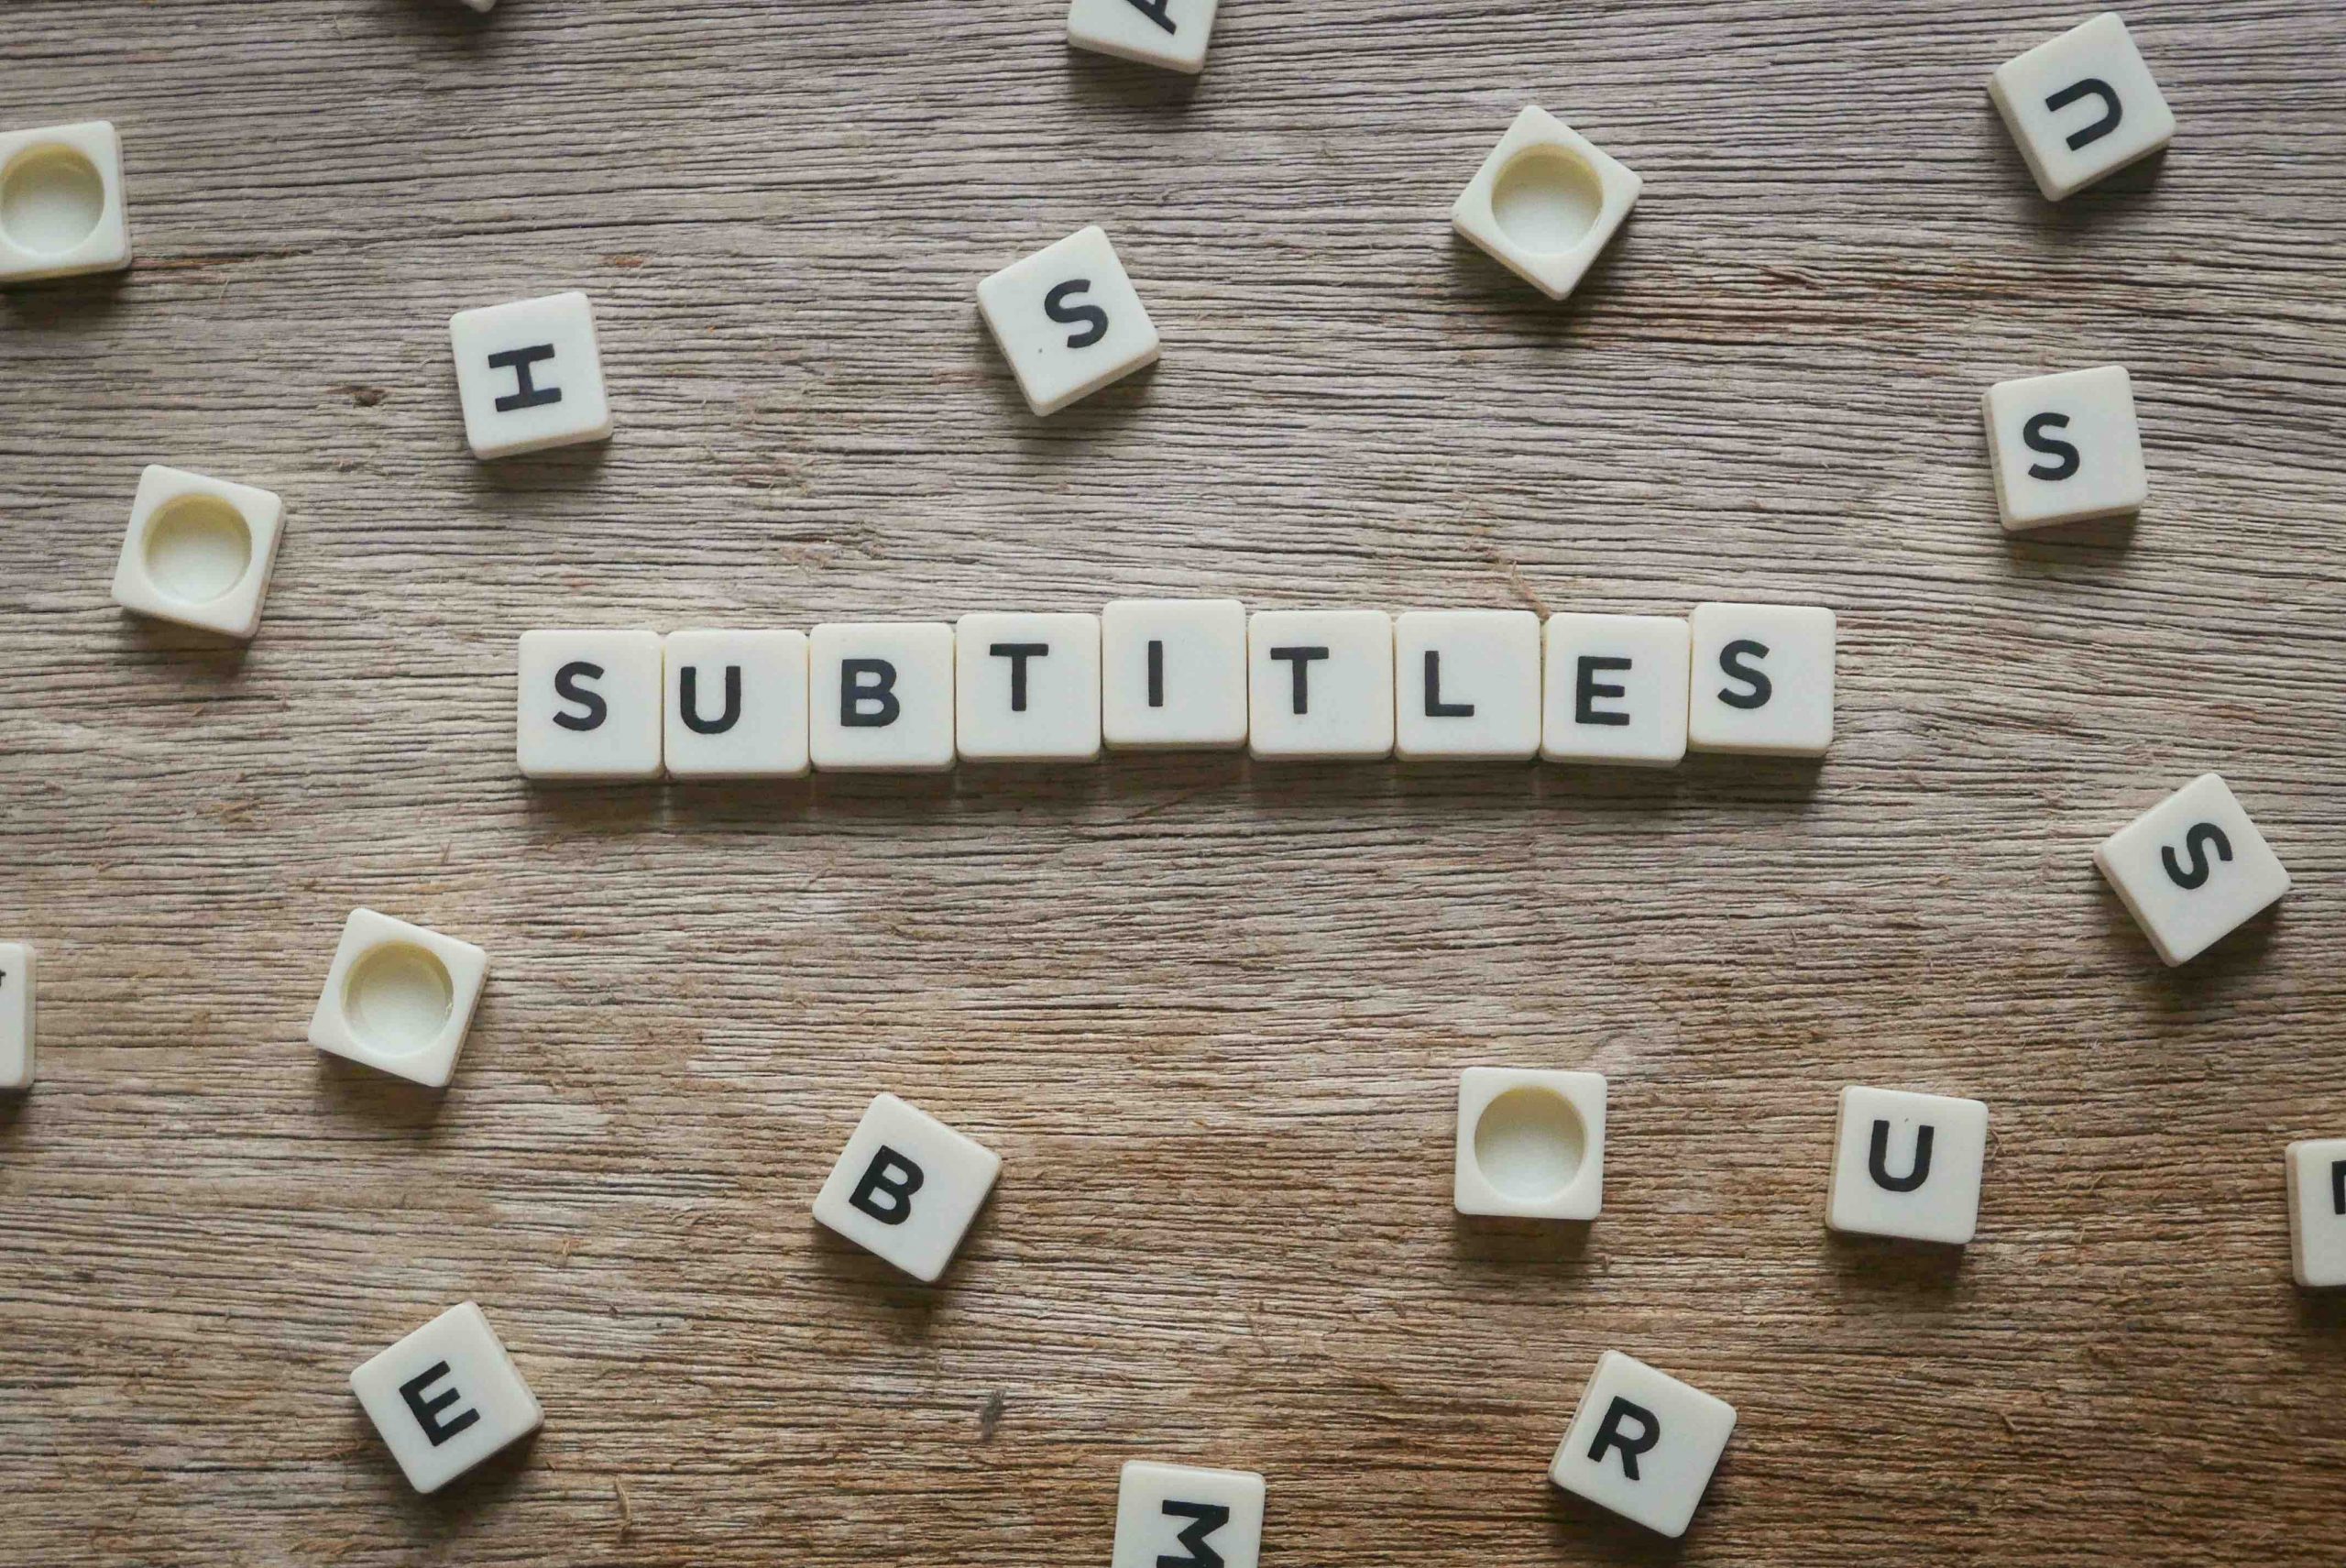 5 Things You Need to Check To Achieve Quality Subtitling at Scale